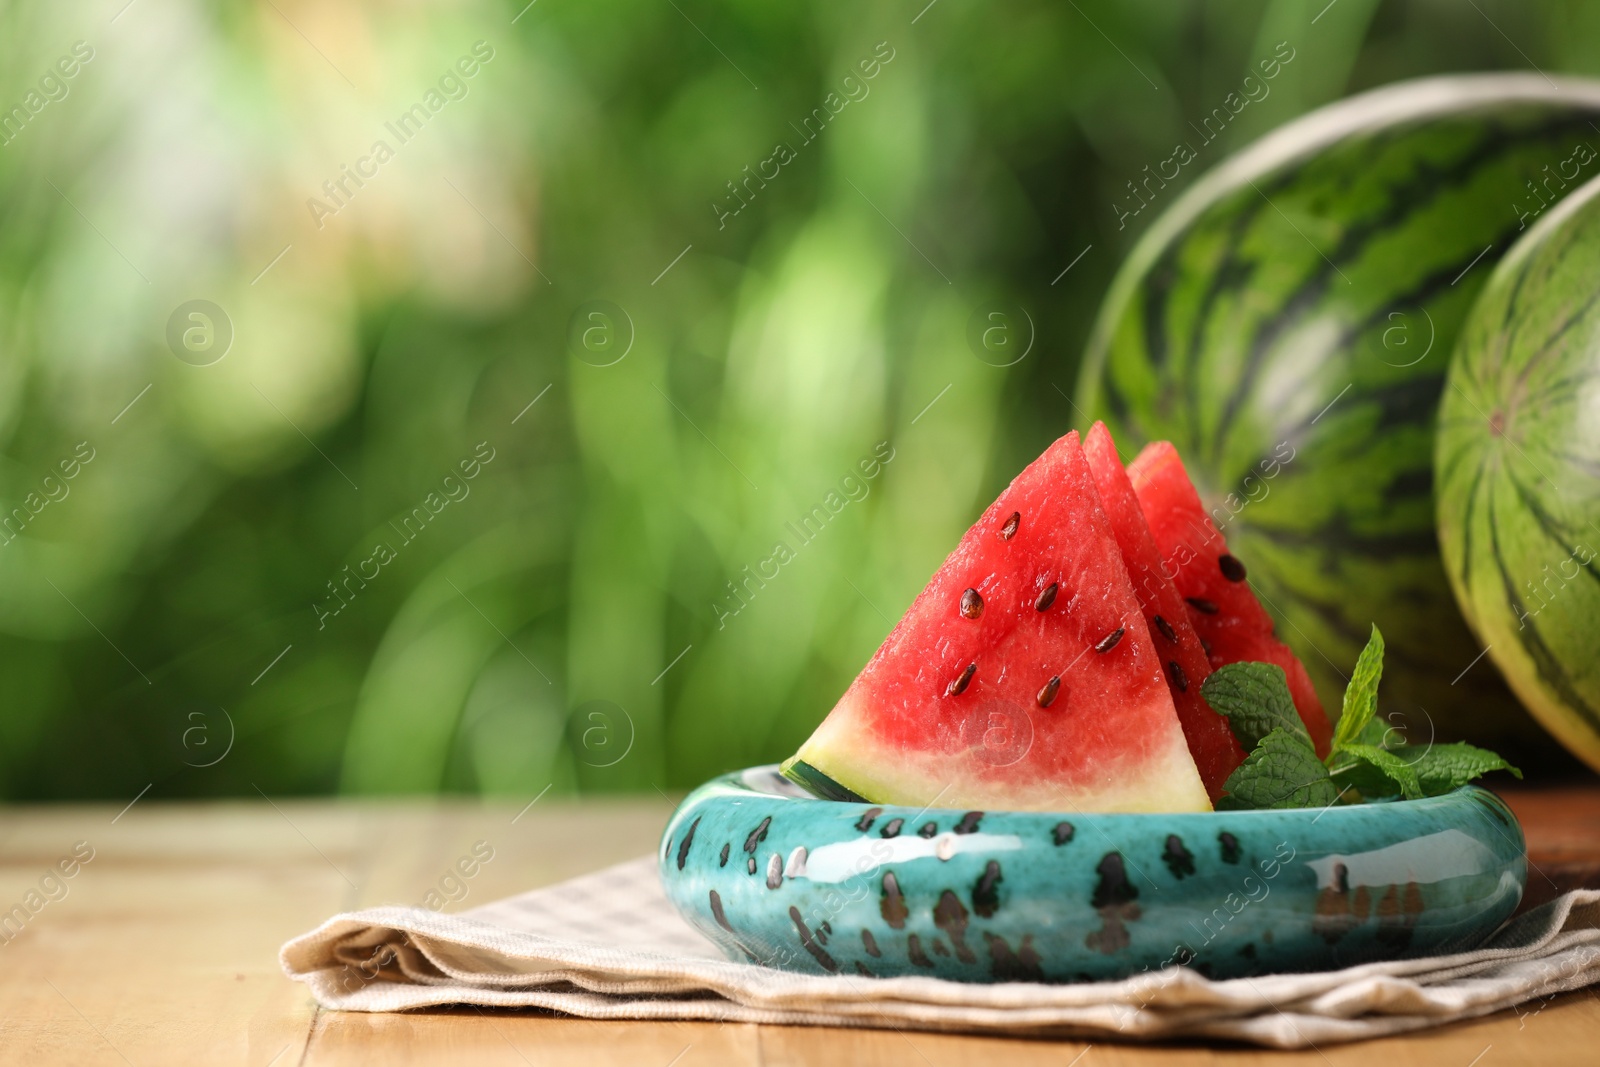 Photo of Slices of delicious ripe watermelon on wooden table outdoors, space for text